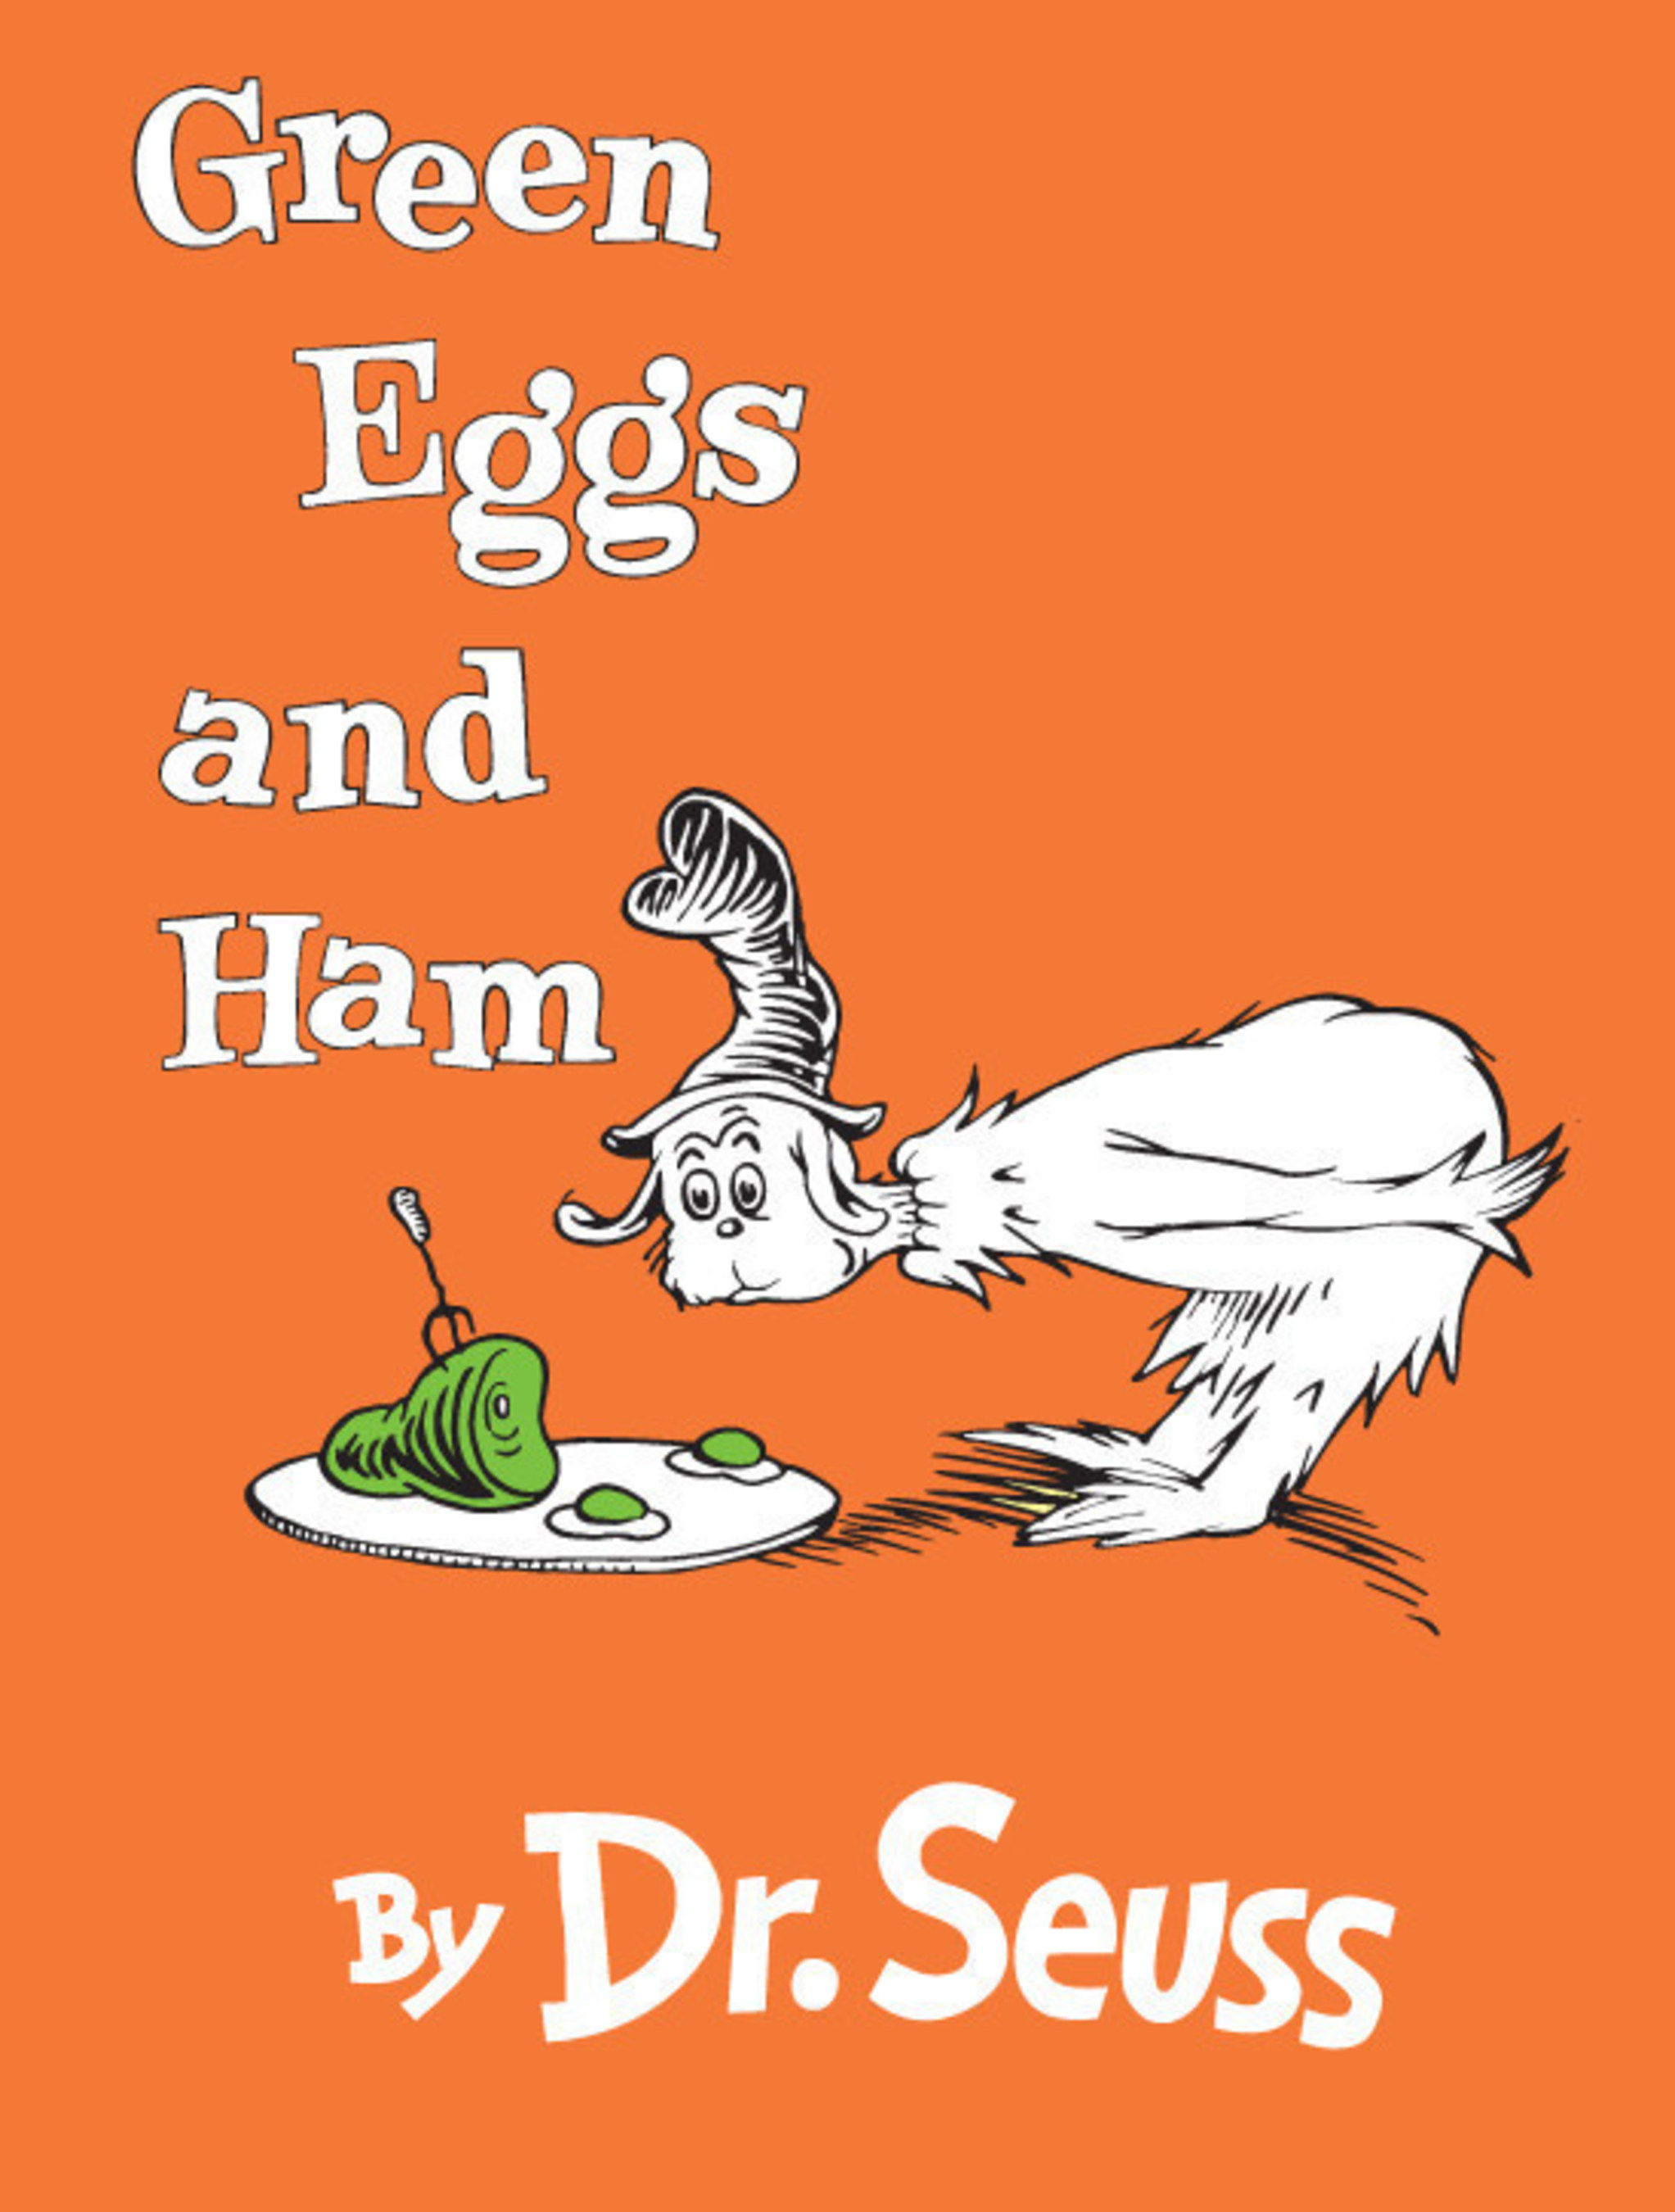 Netflix orders Green Eggs and Ham. Thirteen episodes for the whole fam. In 2018, this classic book, comes globally to Netflix with a whole new look.